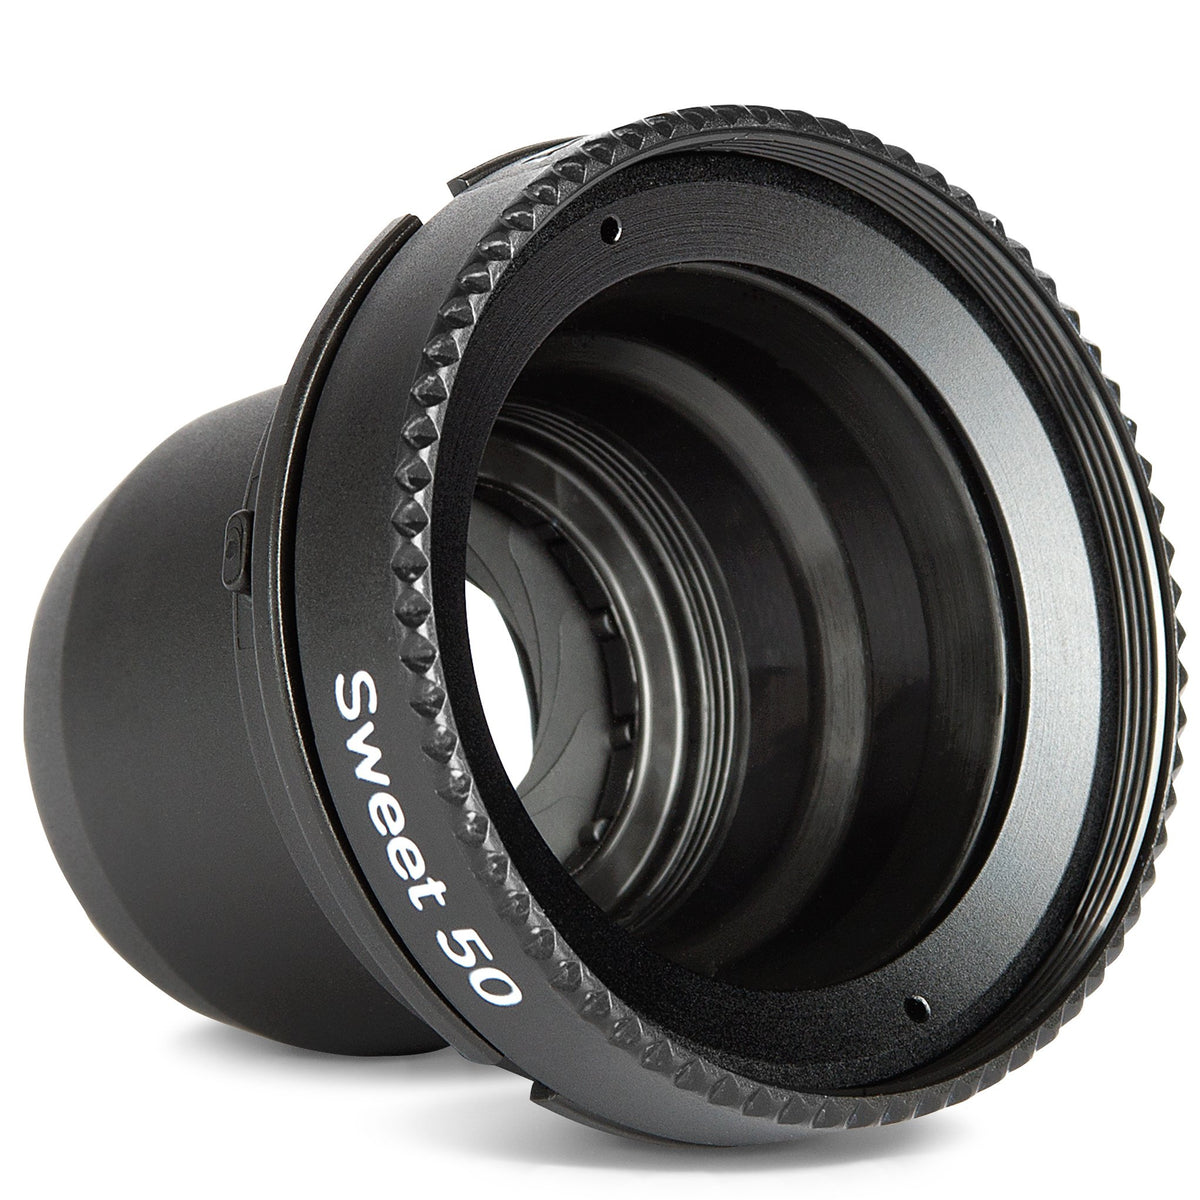 Sweet 50 Optic | Easily Shift Focus In Photos | Lensbaby